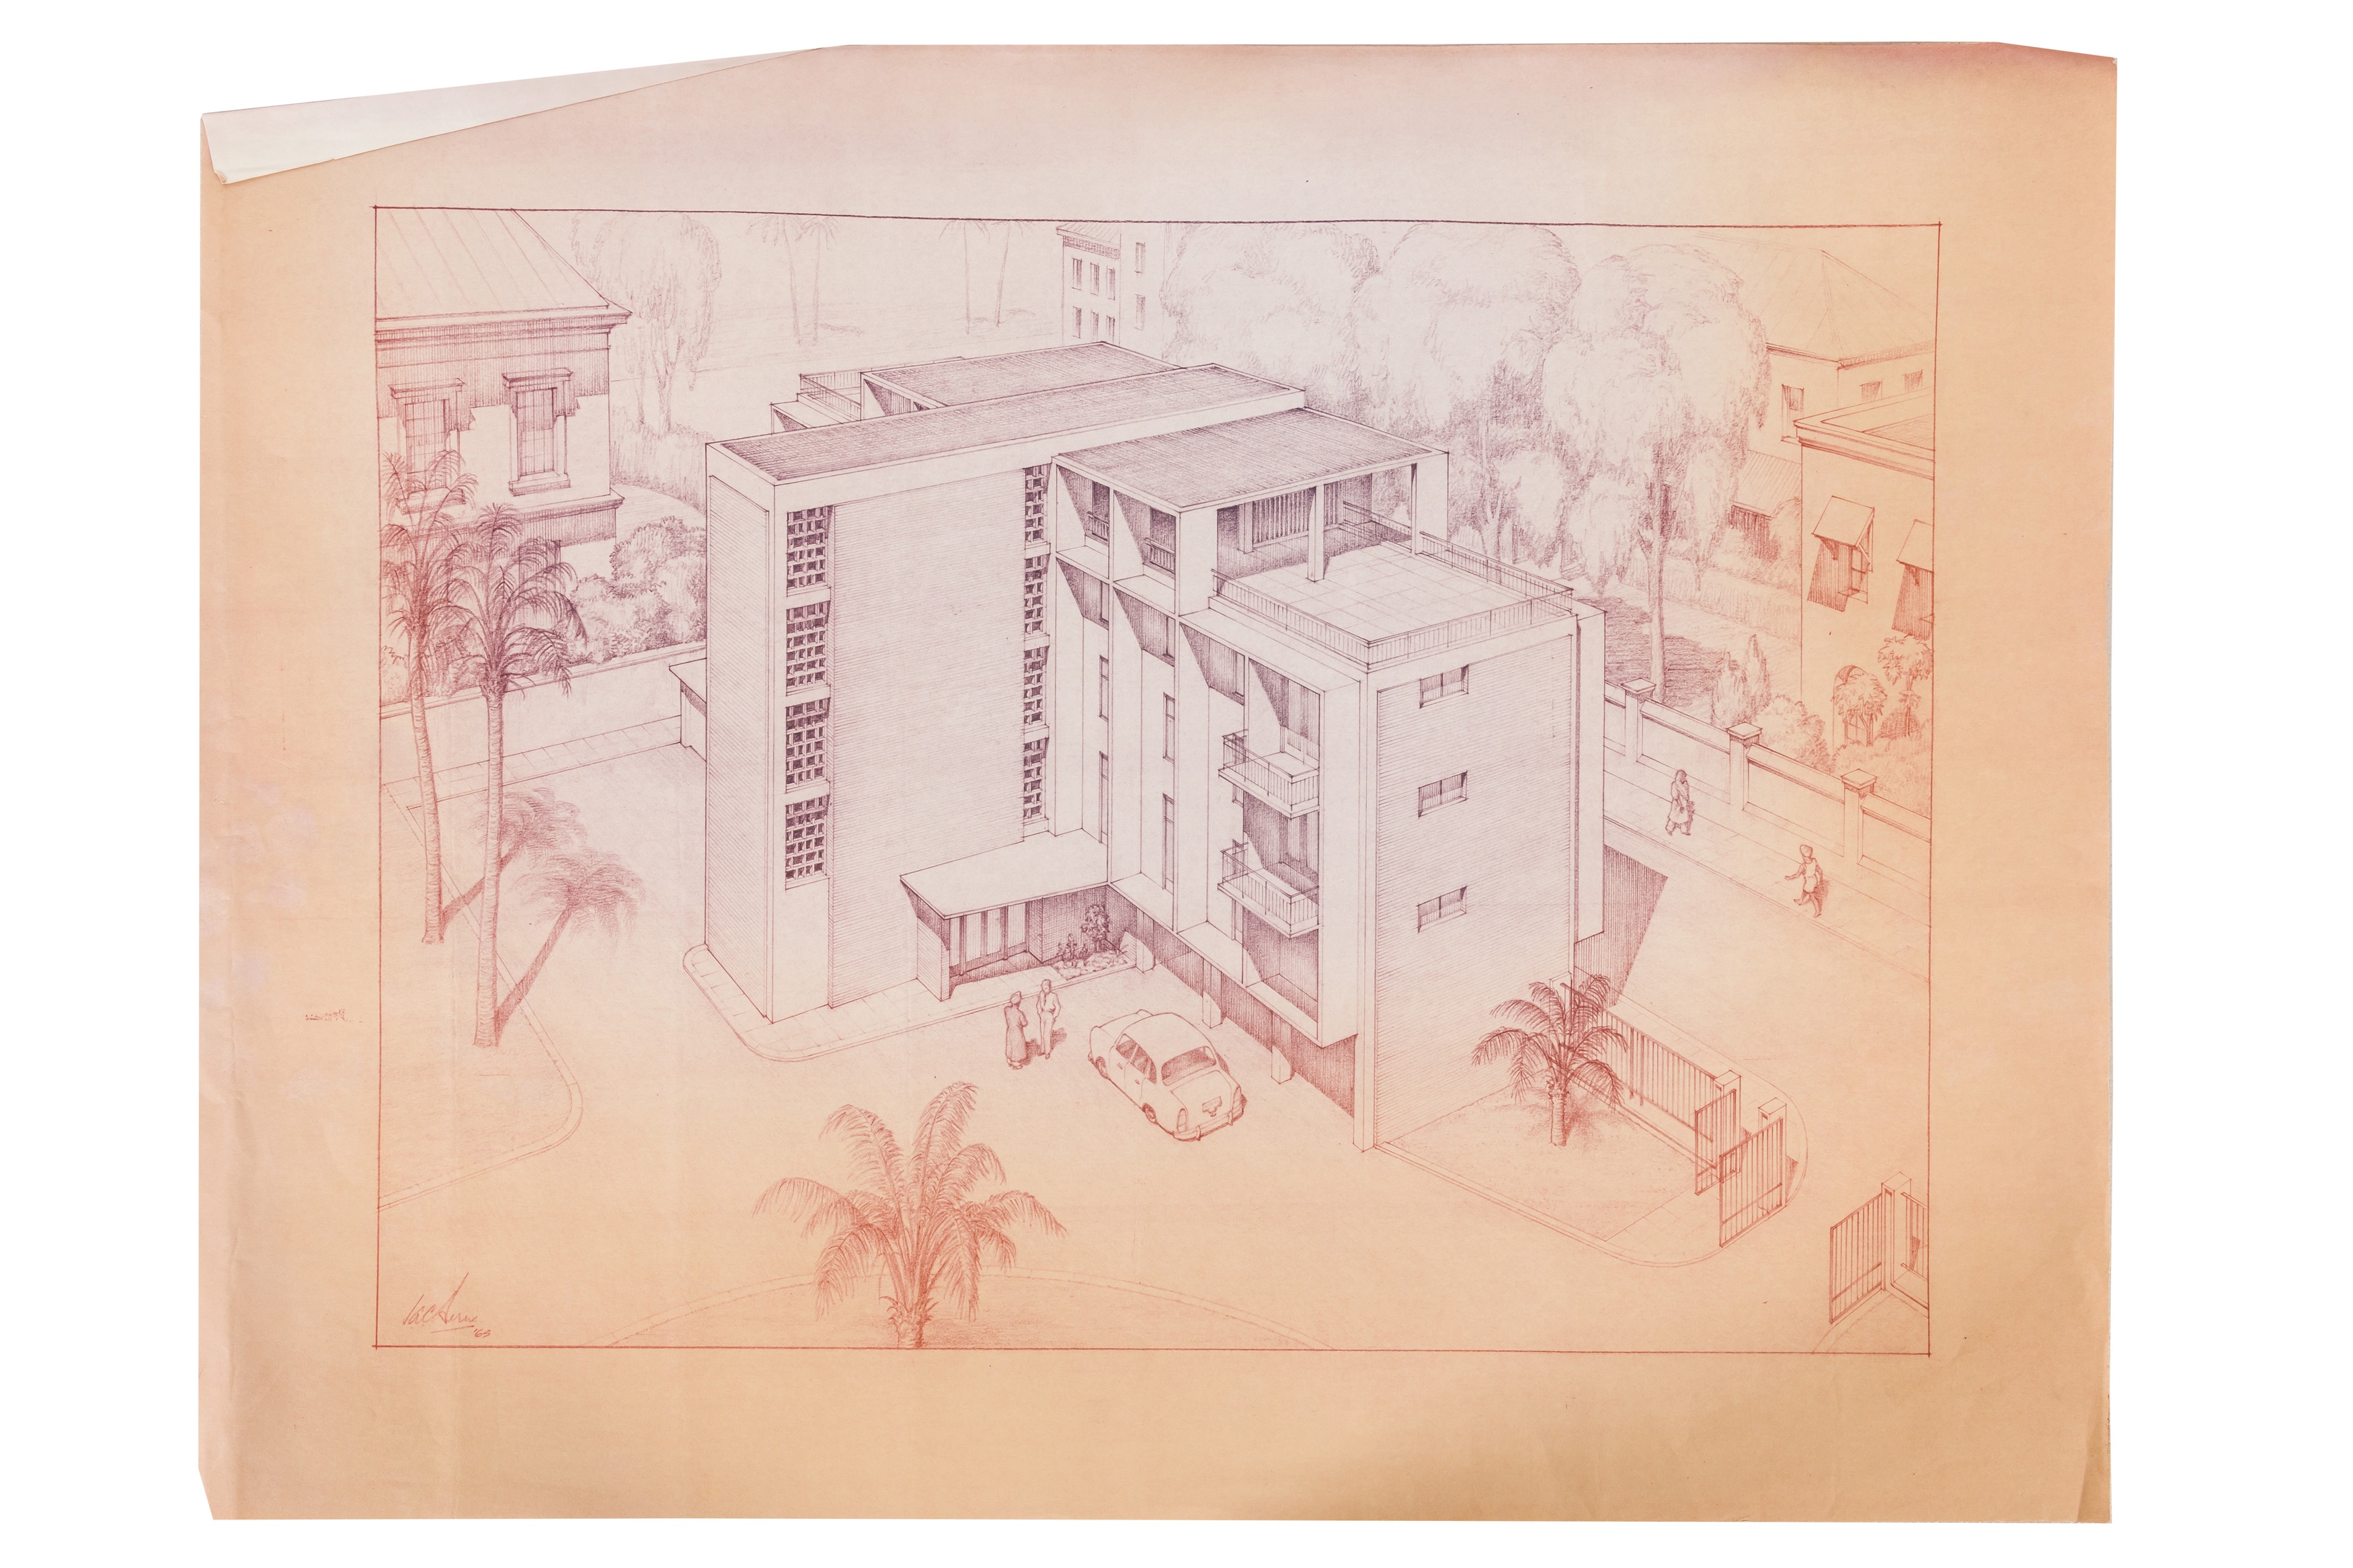 Archive of architect Ivor Herne, works in India, architectural illustrations, plans, stage designs a - Image 11 of 12